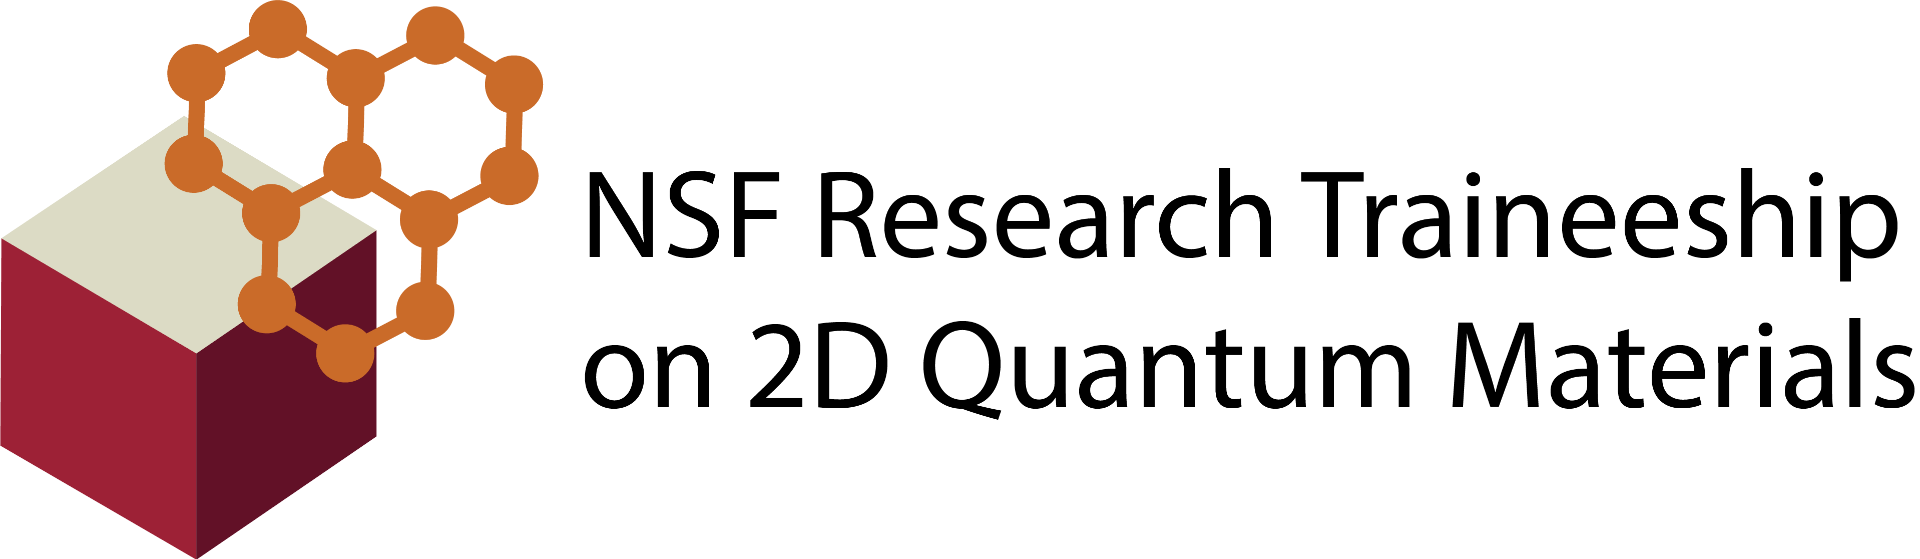 Logo with text "NSF Research Traineeship on 2D Quantum Materials"